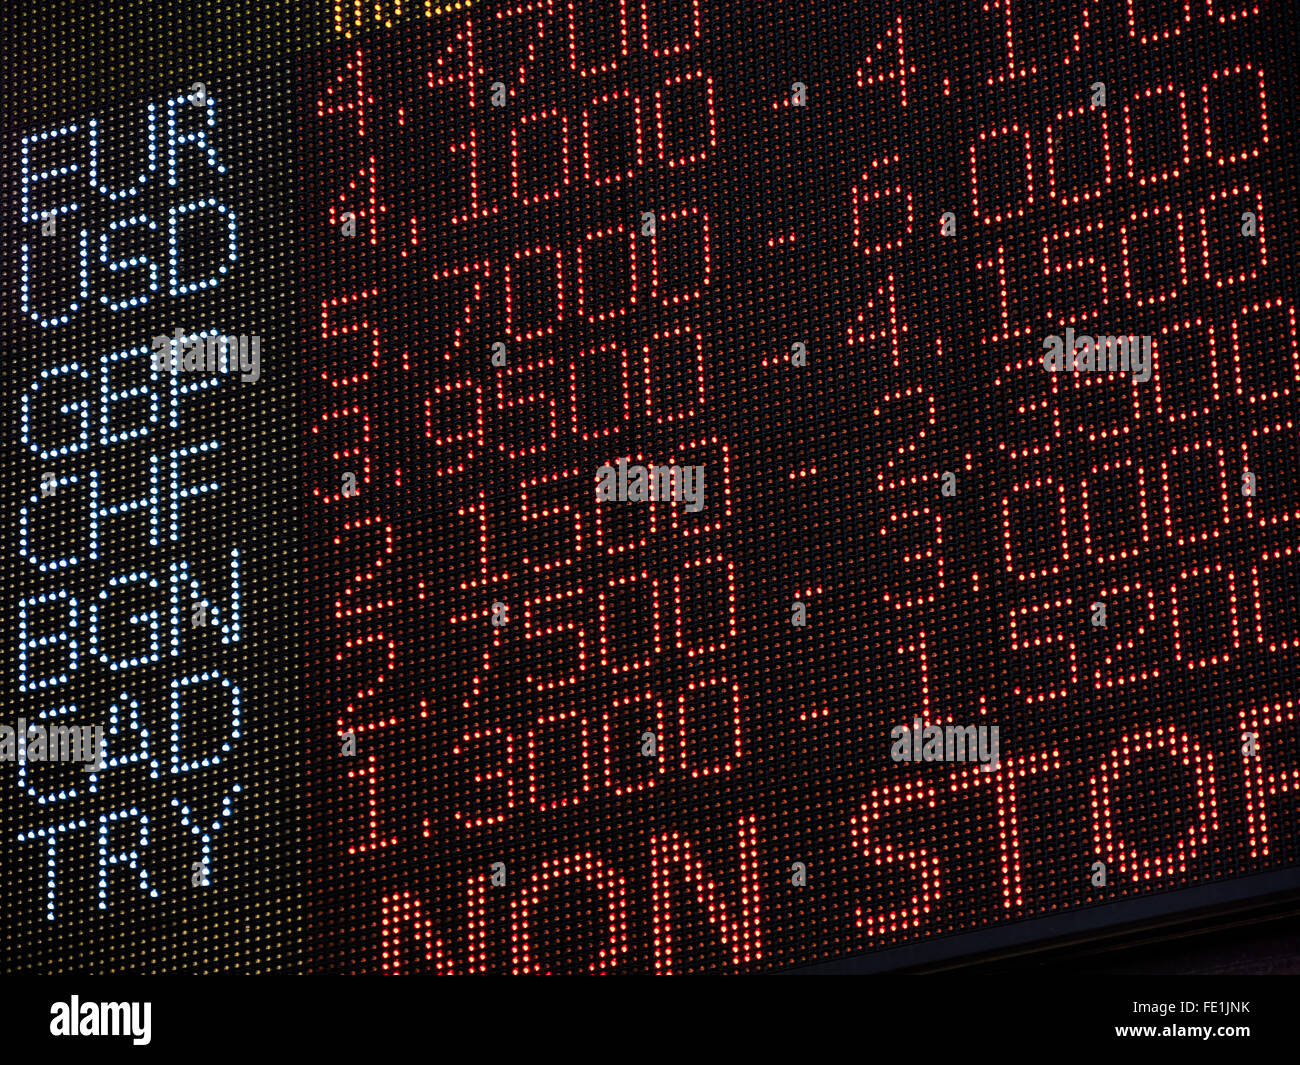 Foreign Currency Exchange Rate Trading On Digital Display Stock Photo